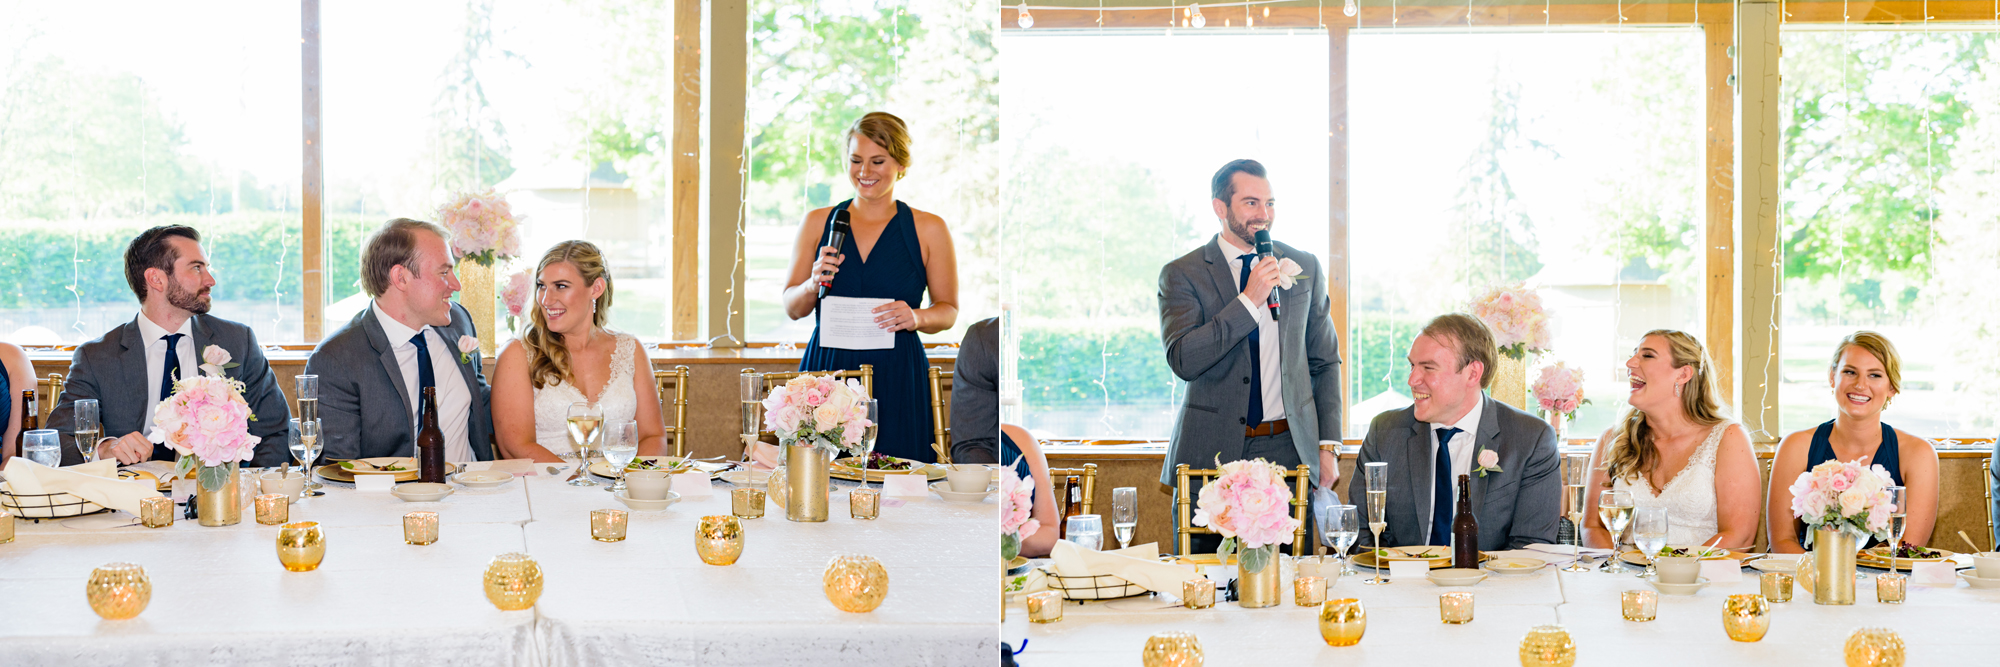 toasts at a wedding reception at Morris Park Country Club